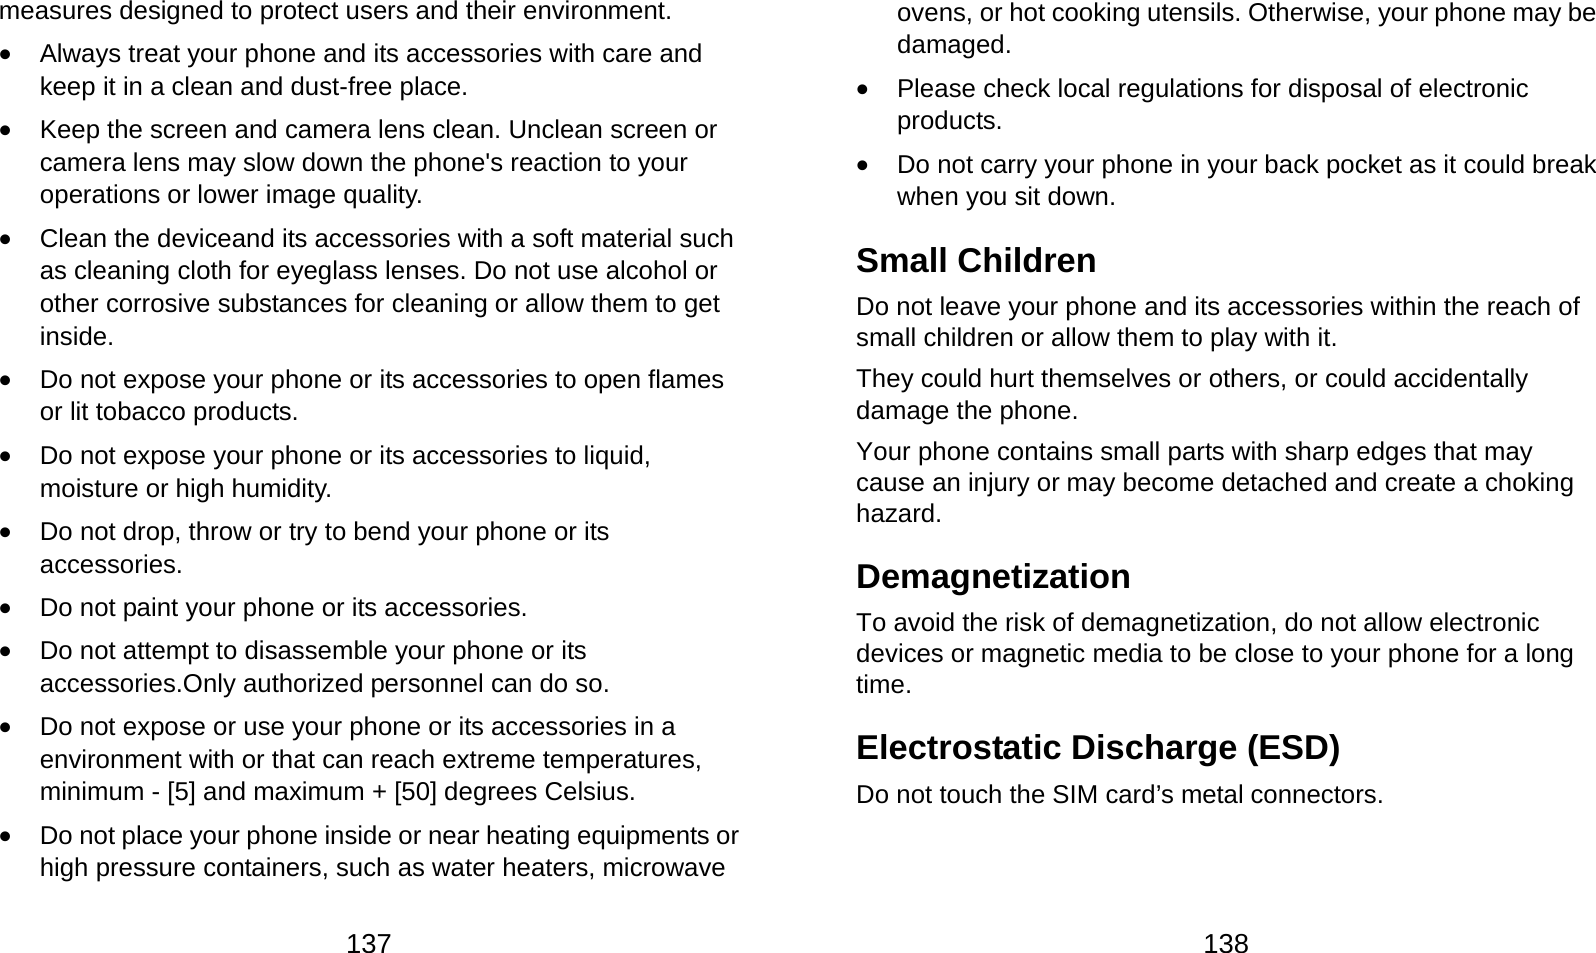  137 measures designed to protect users and their environment.  Always treat your phone and its accessories with care and keep it in a clean and dust-free place.  Keep the screen and camera lens clean. Unclean screen or camera lens may slow down the phone&apos;s reaction to your operations or lower image quality.  Clean the deviceand its accessories with a soft material such as cleaning cloth for eyeglass lenses. Do not use alcohol or other corrosive substances for cleaning or allow them to get inside.  Do not expose your phone or its accessories to open flames or lit tobacco products.  Do not expose your phone or its accessories to liquid, moisture or high humidity.  Do not drop, throw or try to bend your phone or its accessories.  Do not paint your phone or its accessories.  Do not attempt to disassemble your phone or its accessories.Only authorized personnel can do so.  Do not expose or use your phone or its accessories in a environment with or that can reach extreme temperatures, minimum - [5] and maximum + [50] degrees Celsius.  Do not place your phone inside or near heating equipments or high pressure containers, such as water heaters, microwave  138 ovens, or hot cooking utensils. Otherwise, your phone may be damaged.  Please check local regulations for disposal of electronic products.  Do not carry your phone in your back pocket as it could break when you sit down. Small Children Do not leave your phone and its accessories within the reach of small children or allow them to play with it. They could hurt themselves or others, or could accidentally damage the phone. Your phone contains small parts with sharp edges that may cause an injury or may become detached and create a choking hazard. Demagnetization To avoid the risk of demagnetization, do not allow electronic devices or magnetic media to be close to your phone for a long time. Electrostatic Discharge (ESD) Do not touch the SIM card’s metal connectors. 